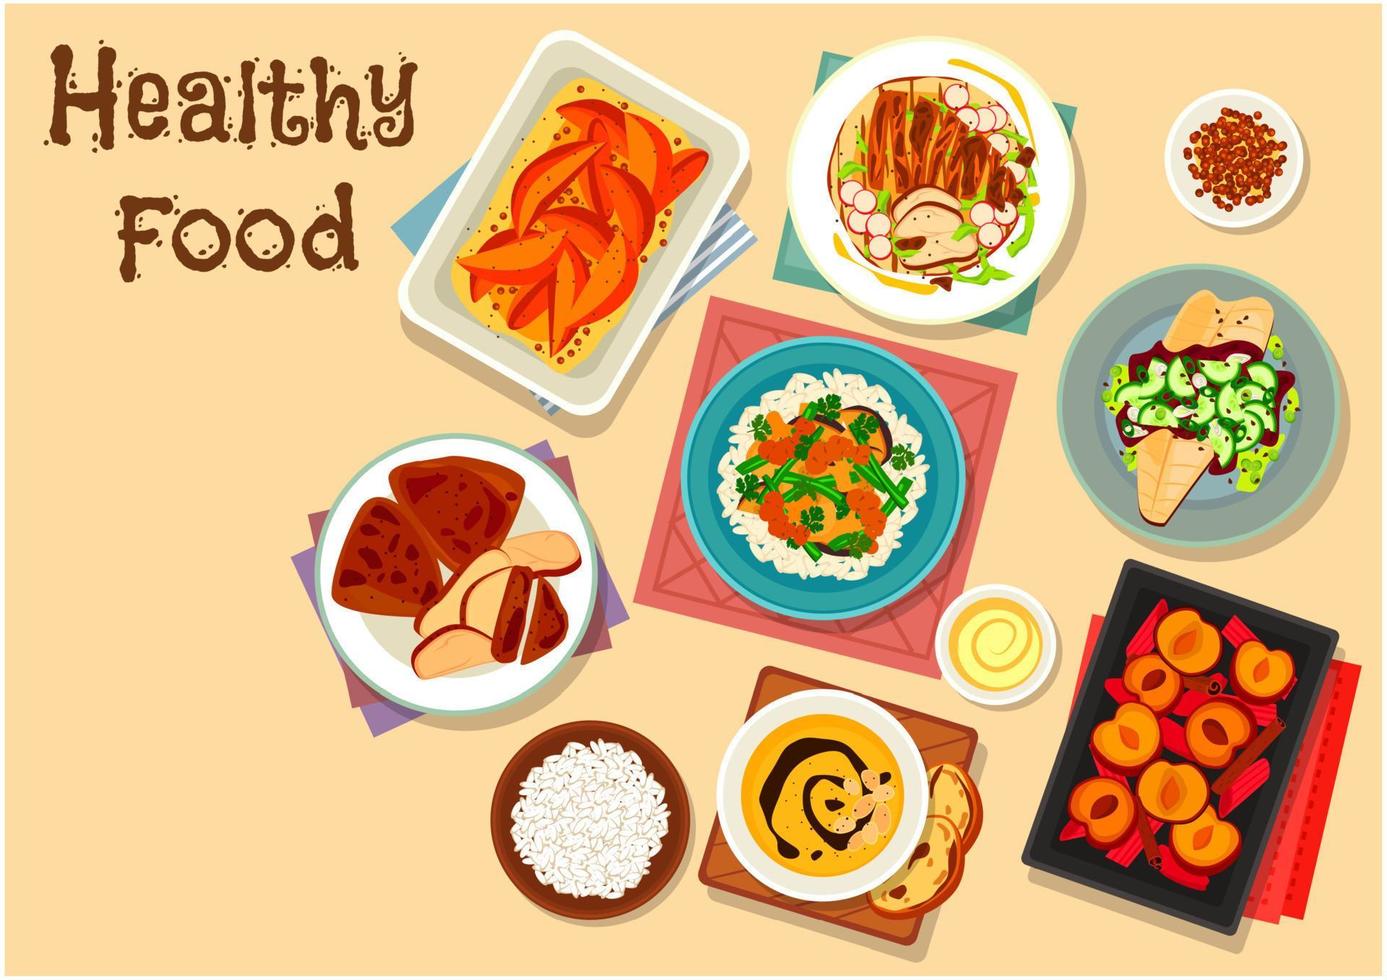 Healthy food dishes icon for lunch menu design vector